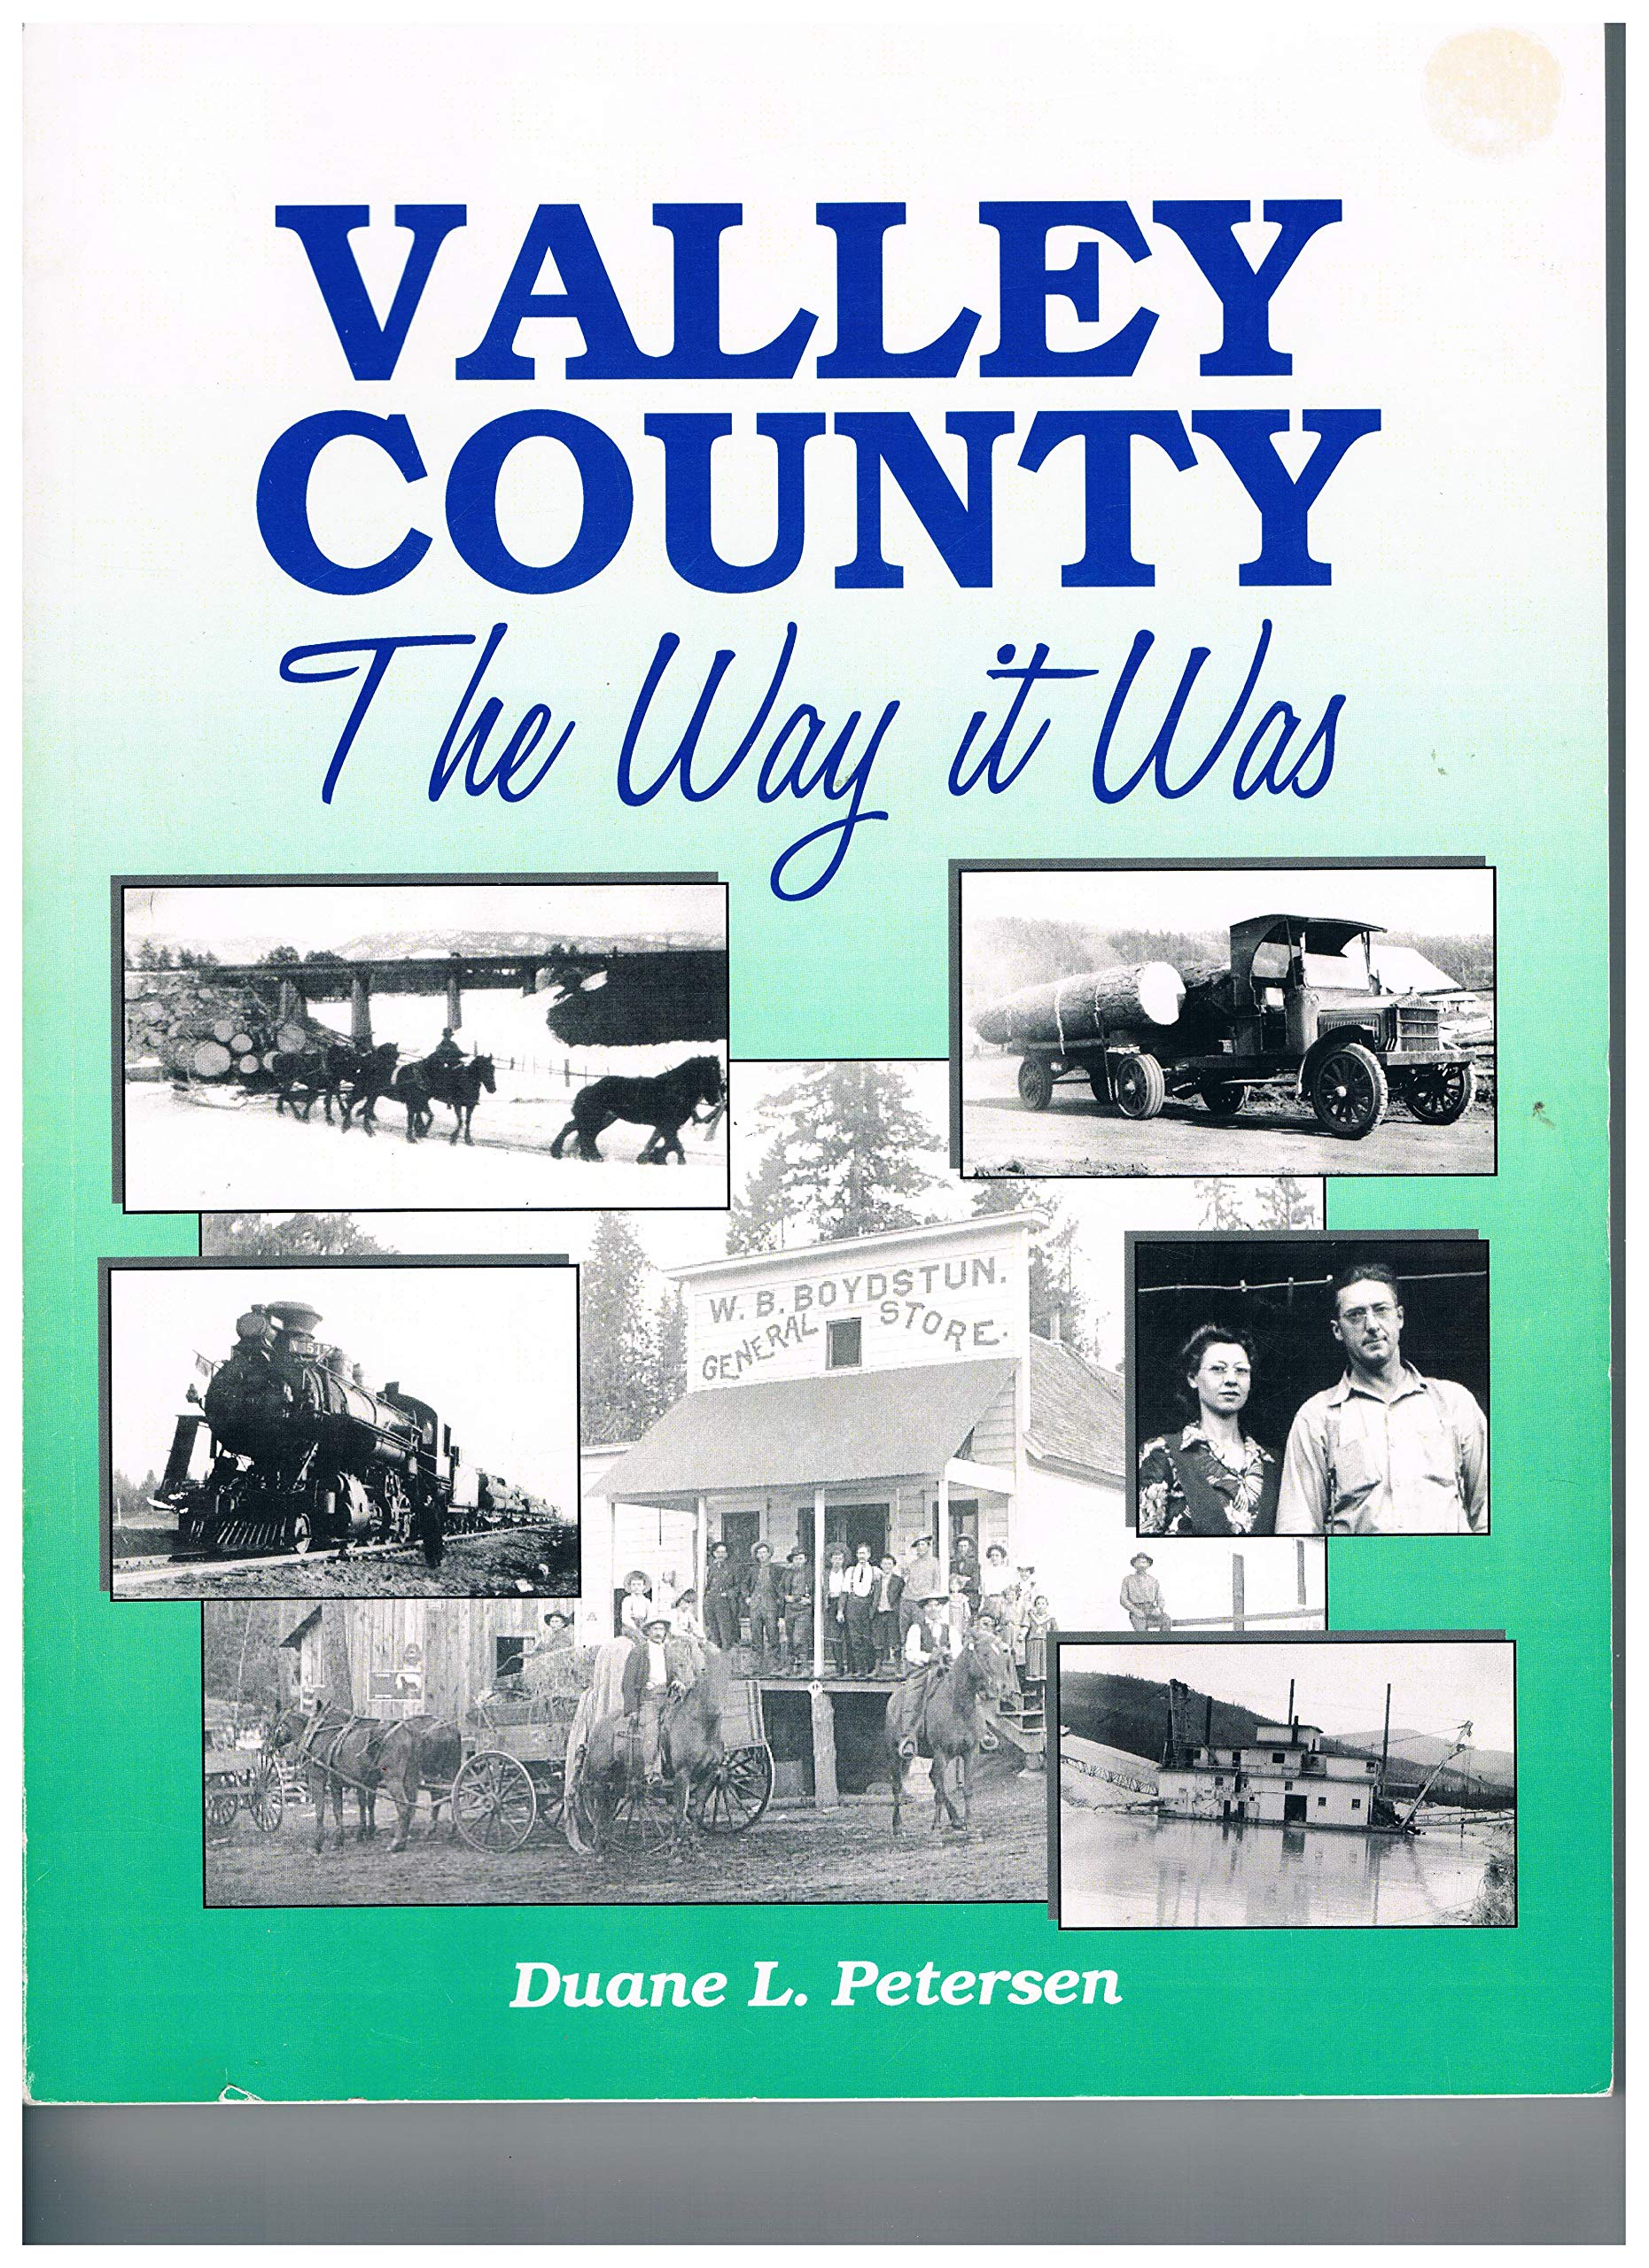 Valley County: The way it was (book cover)